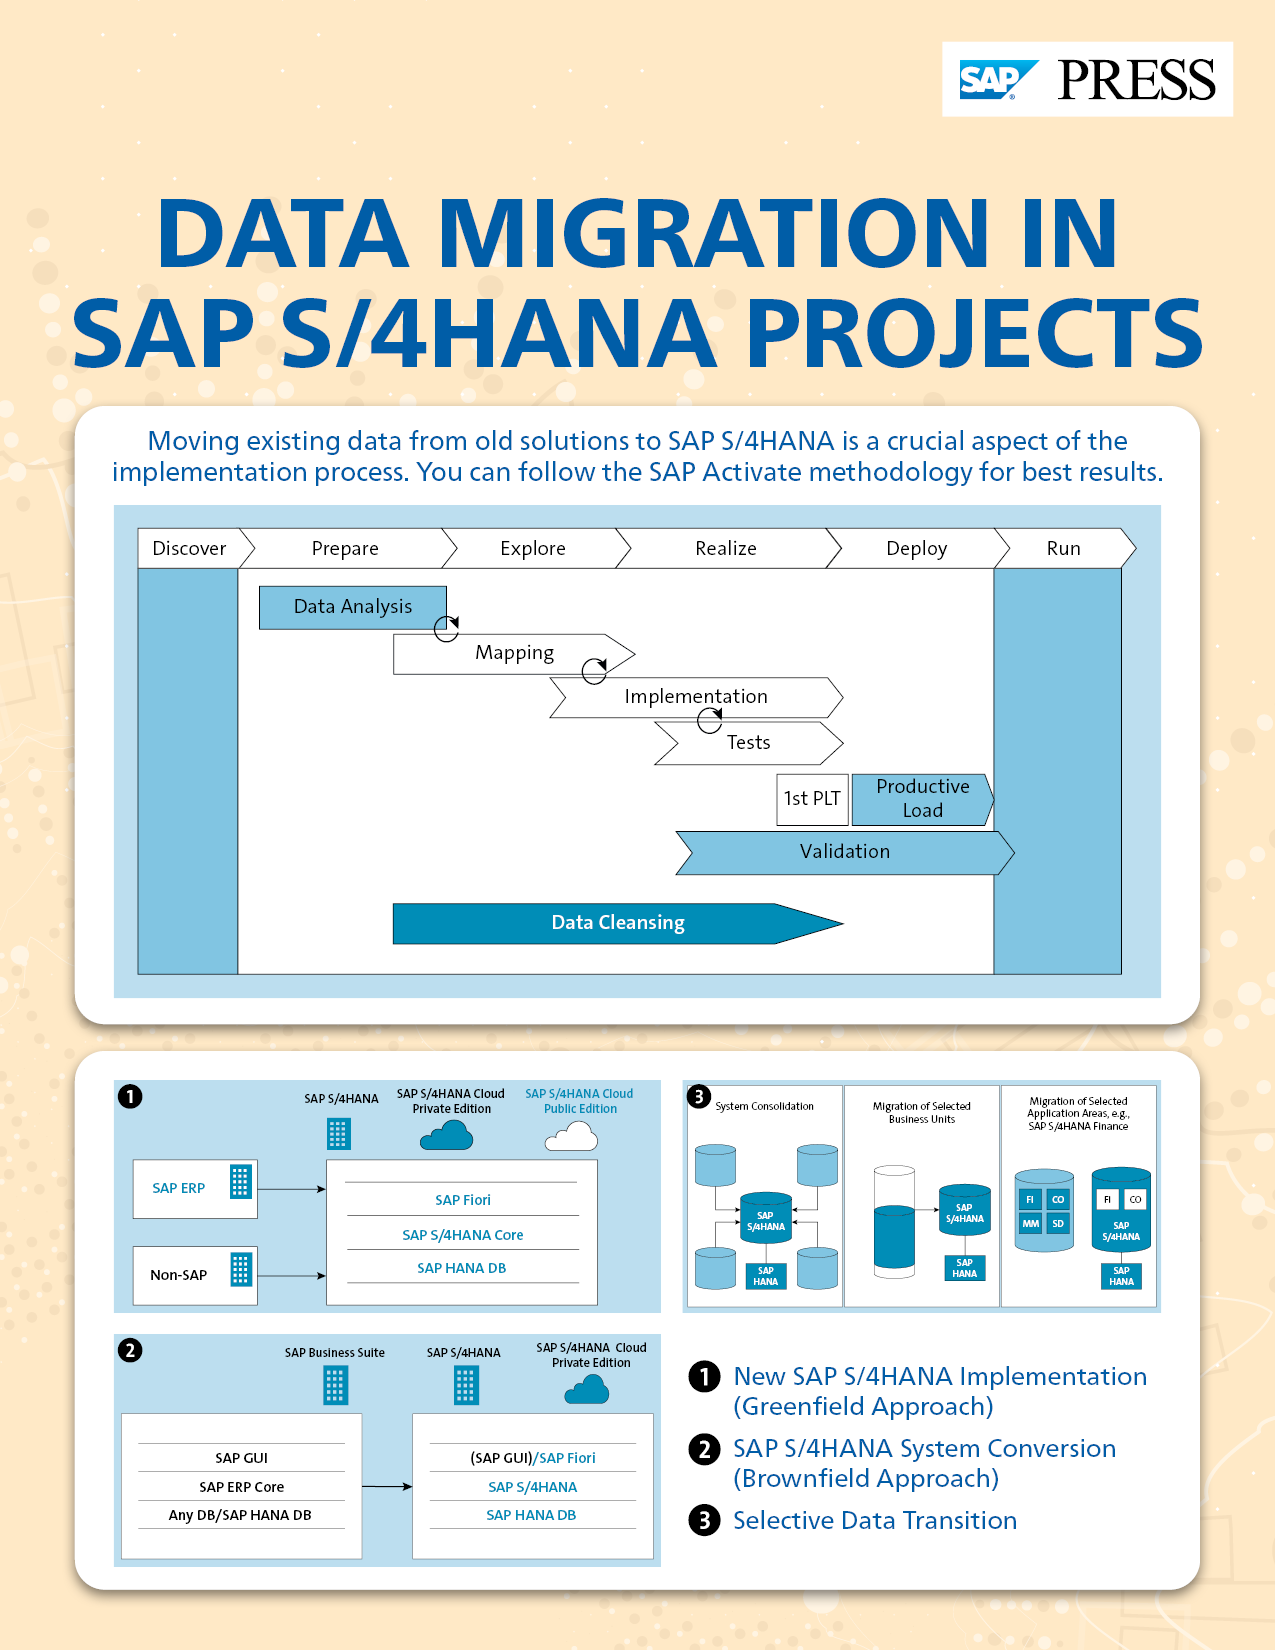 Data Migration in SAP S/4HANA Projects